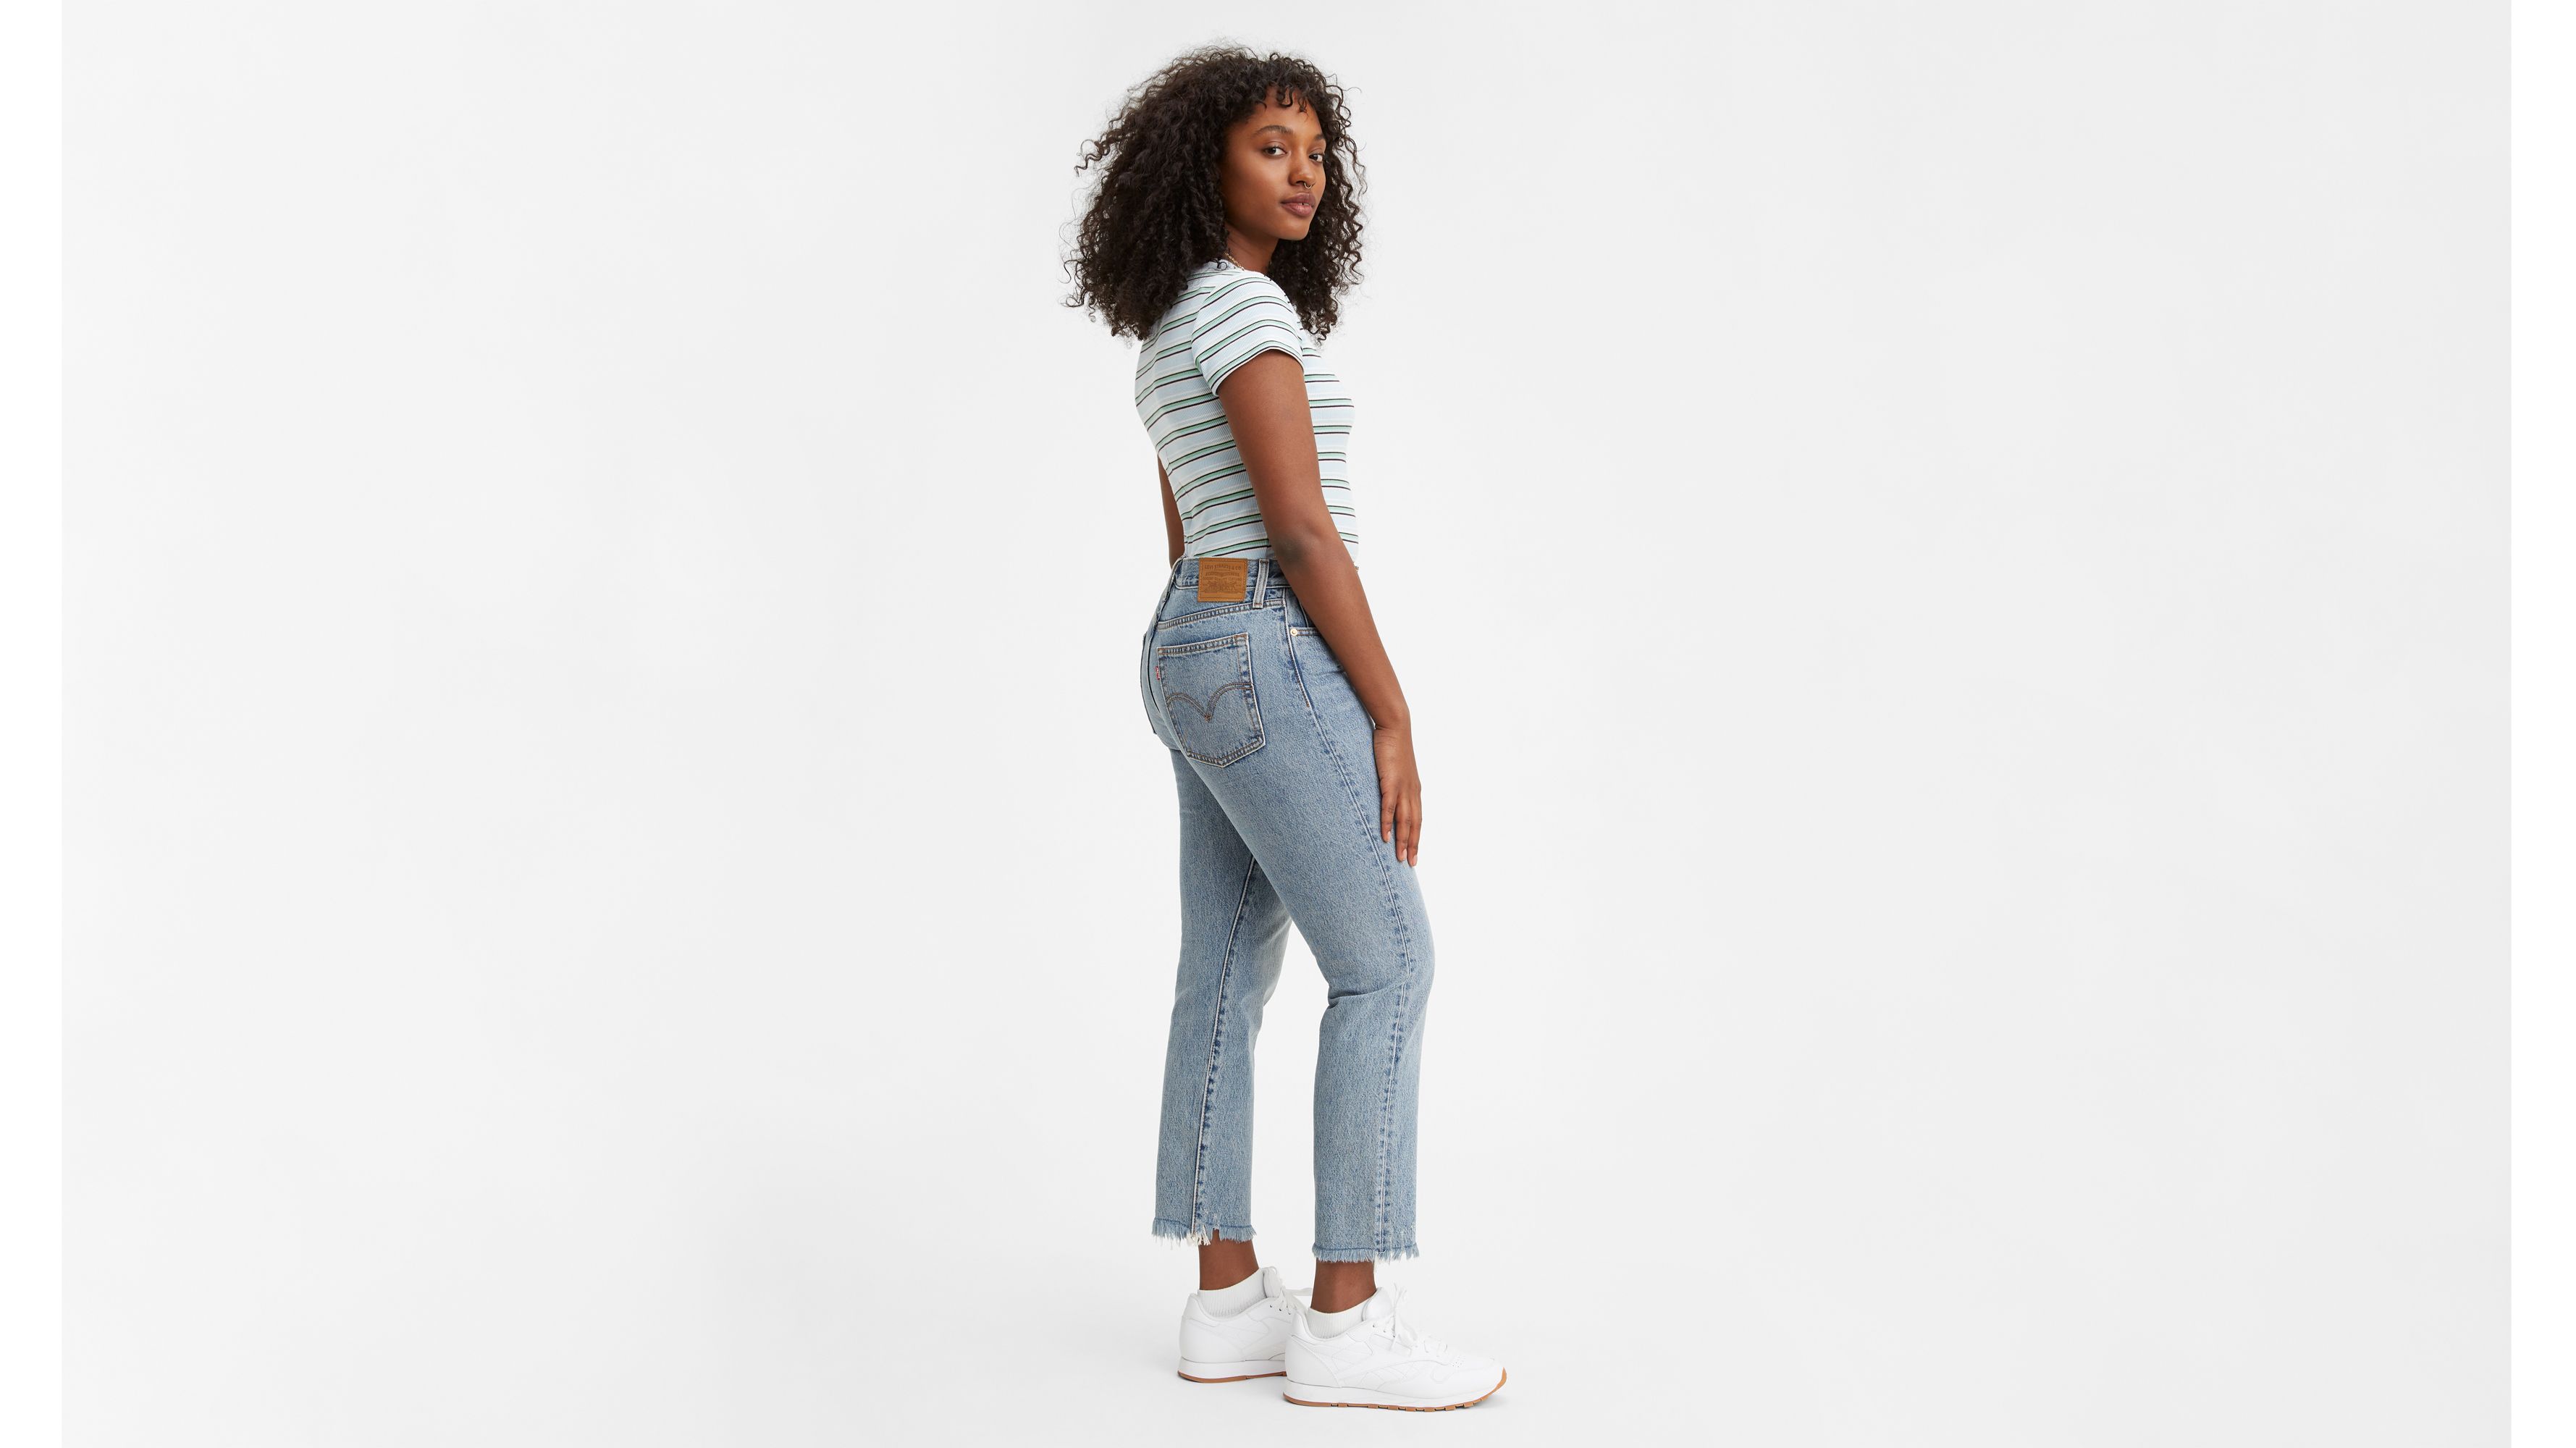 levi's wedgie fit tapered leg